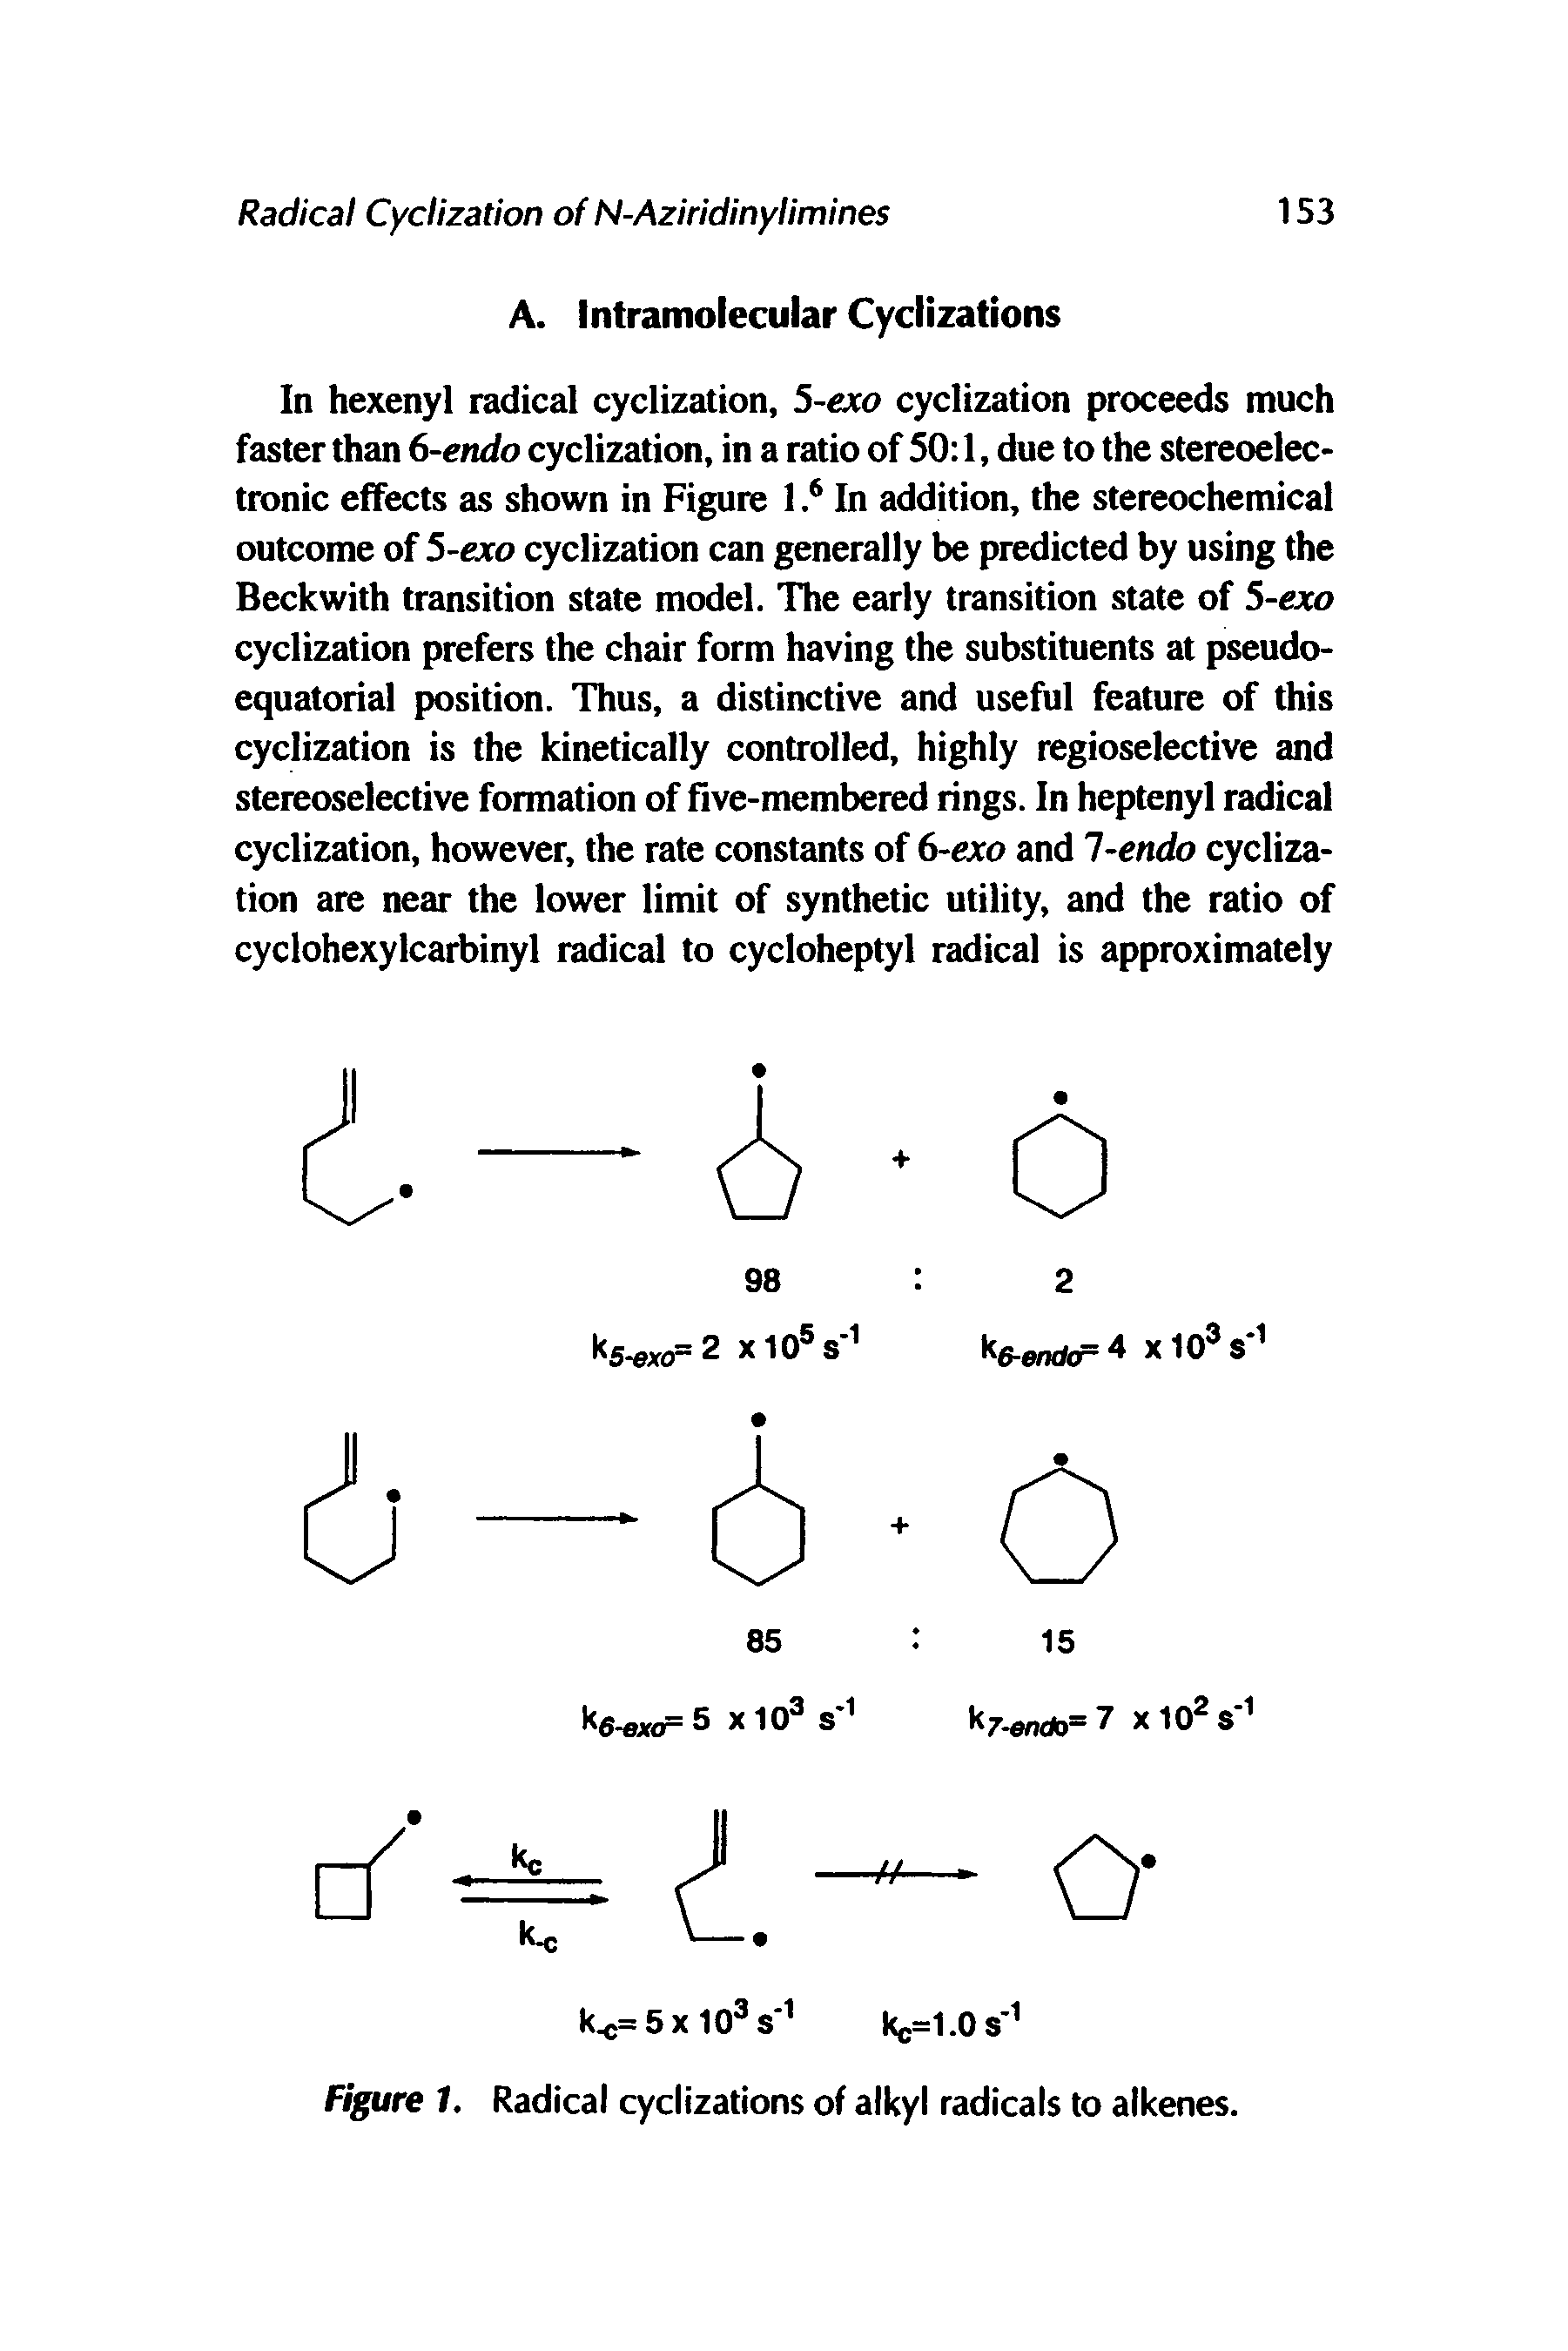 Figure I. Radical cyclizations of alkyl radicals to alkenes.